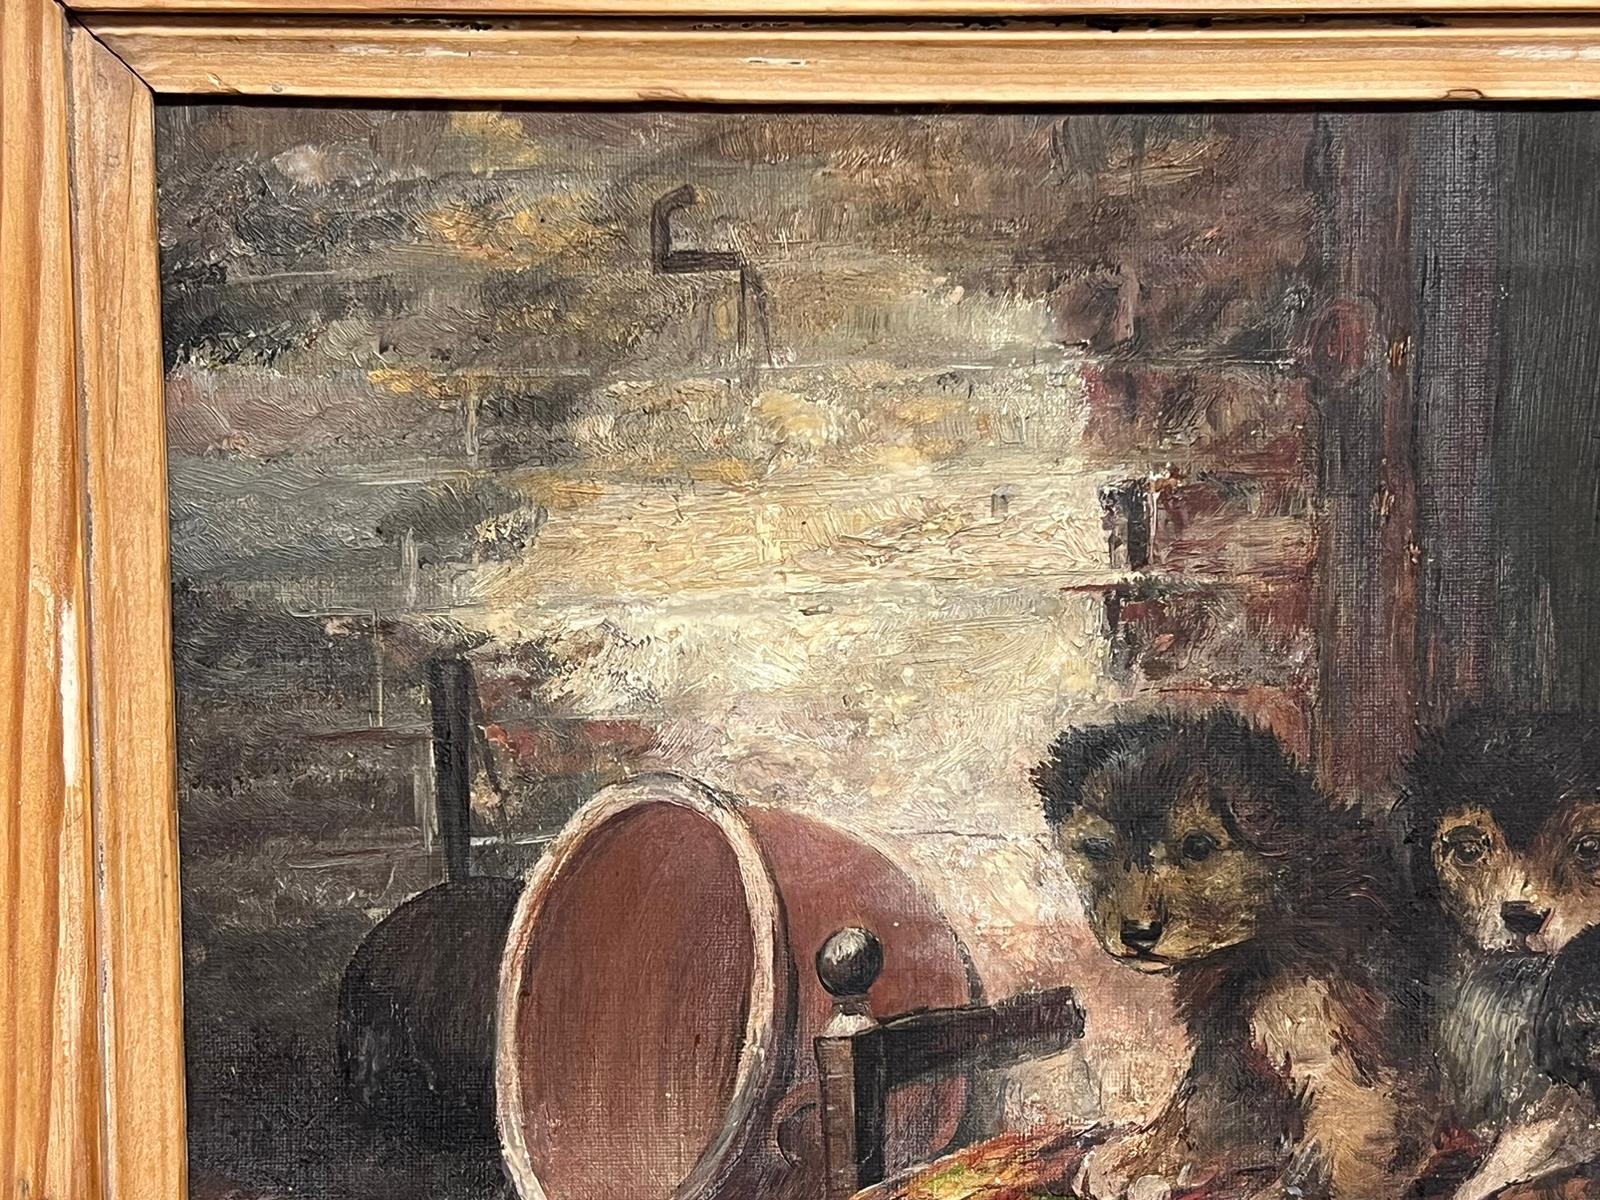 19th Century English
The Three Puppies
signed with monogram,
oil on canvas, framed in antique pine wood frame
framed: 15.5 x 19 inches
canvas: 11 x 15 inches
provenance: private collection
condition: very good and sound condition